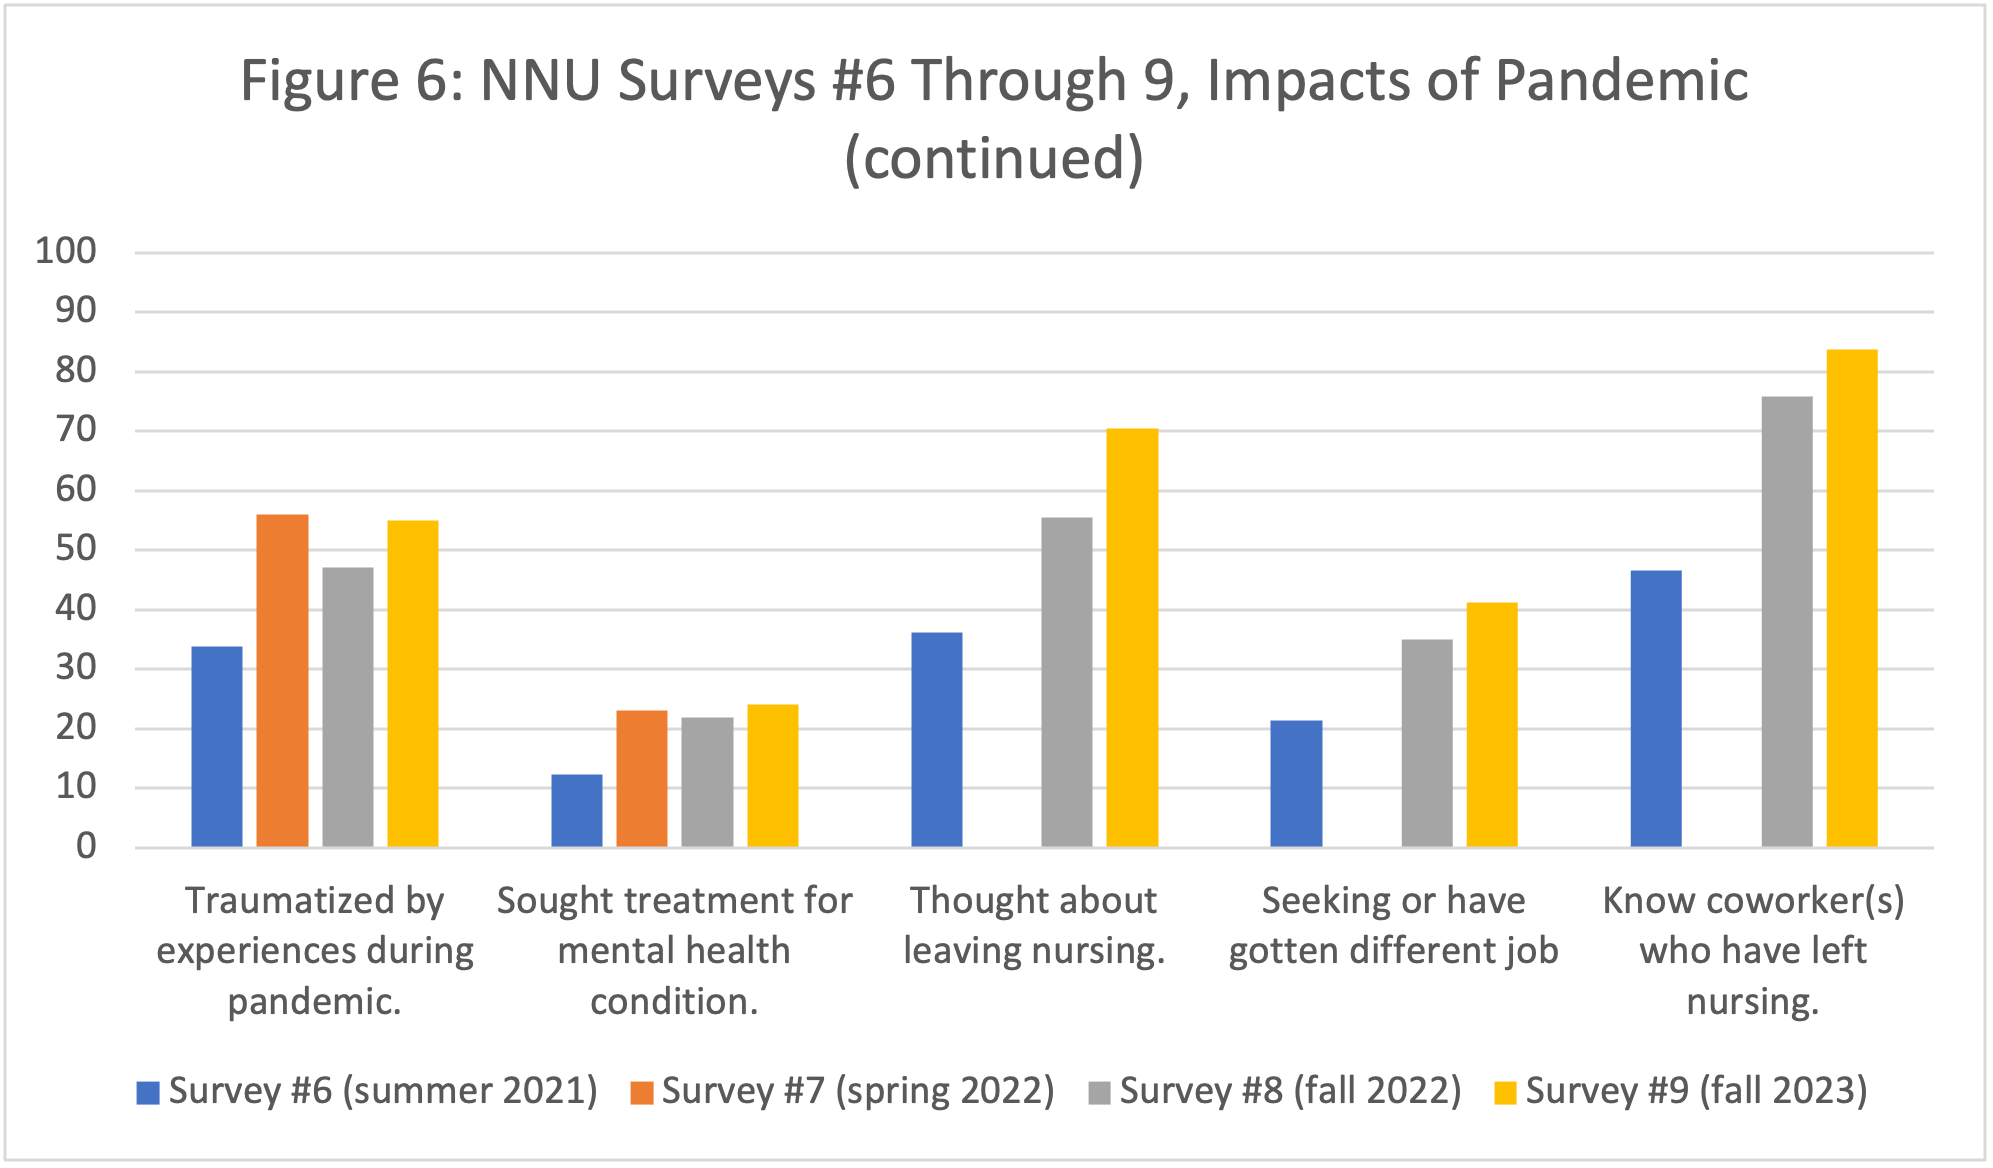 Figure 6: NNU Surveys #6 Through 9, Impacts of Pandemic (continued)